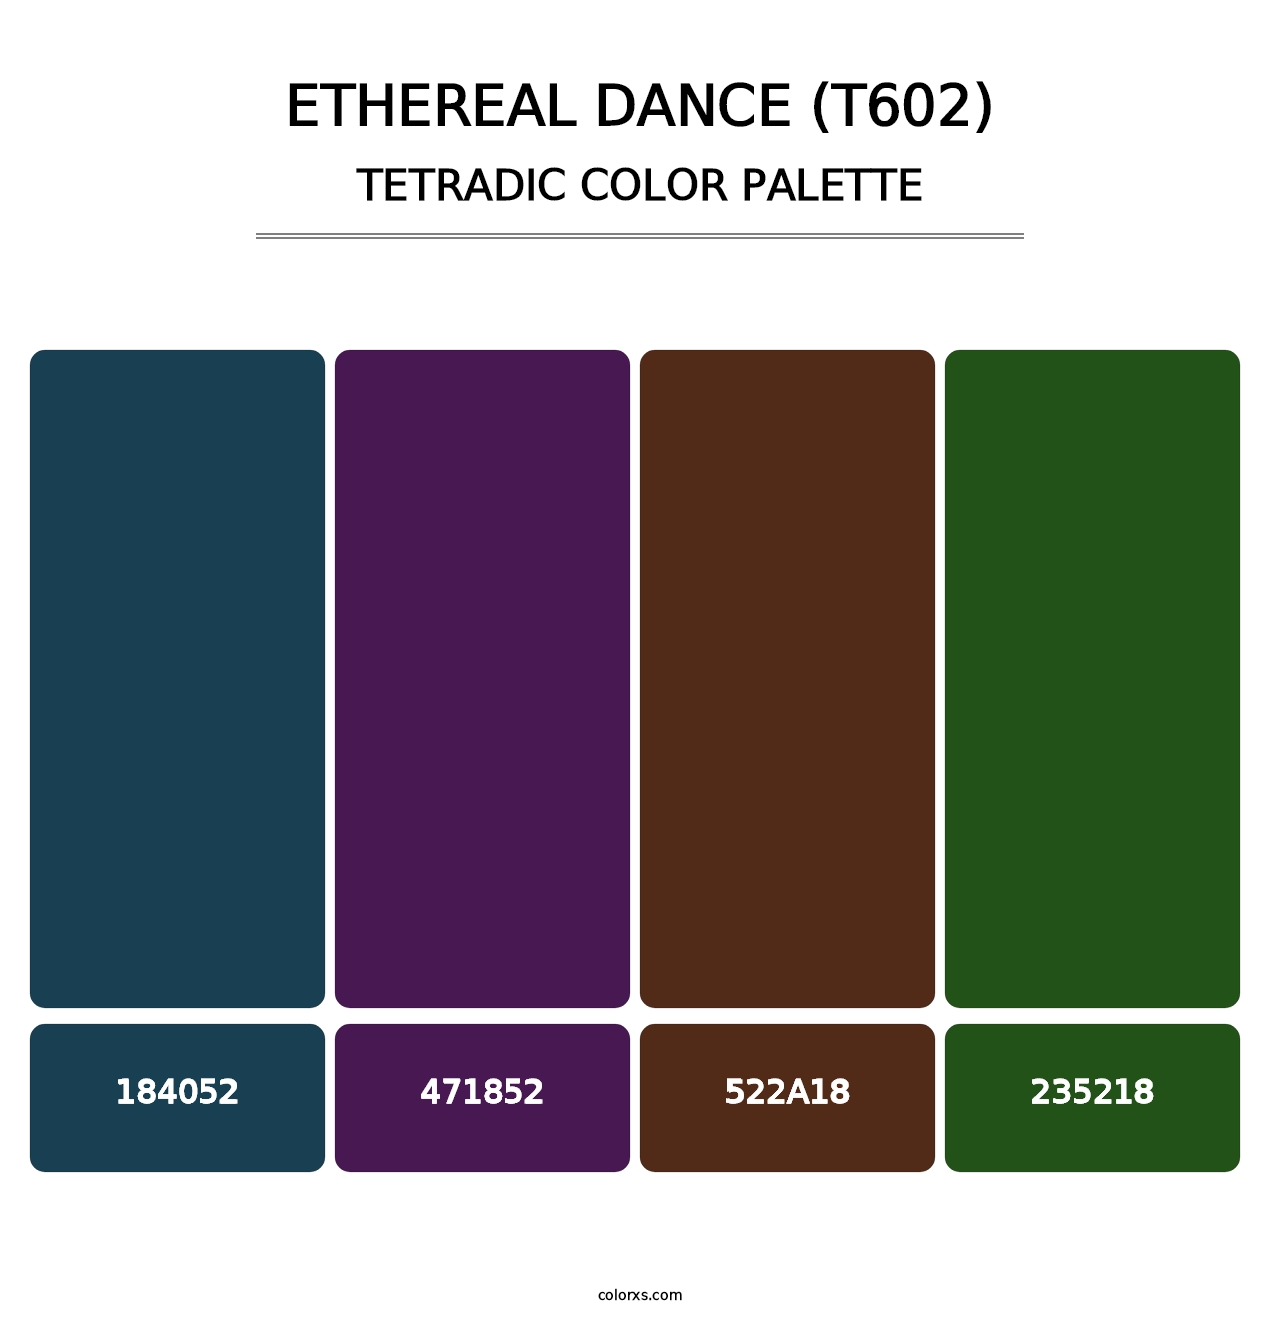 Ethereal Dance (T602) - Tetradic Color Palette